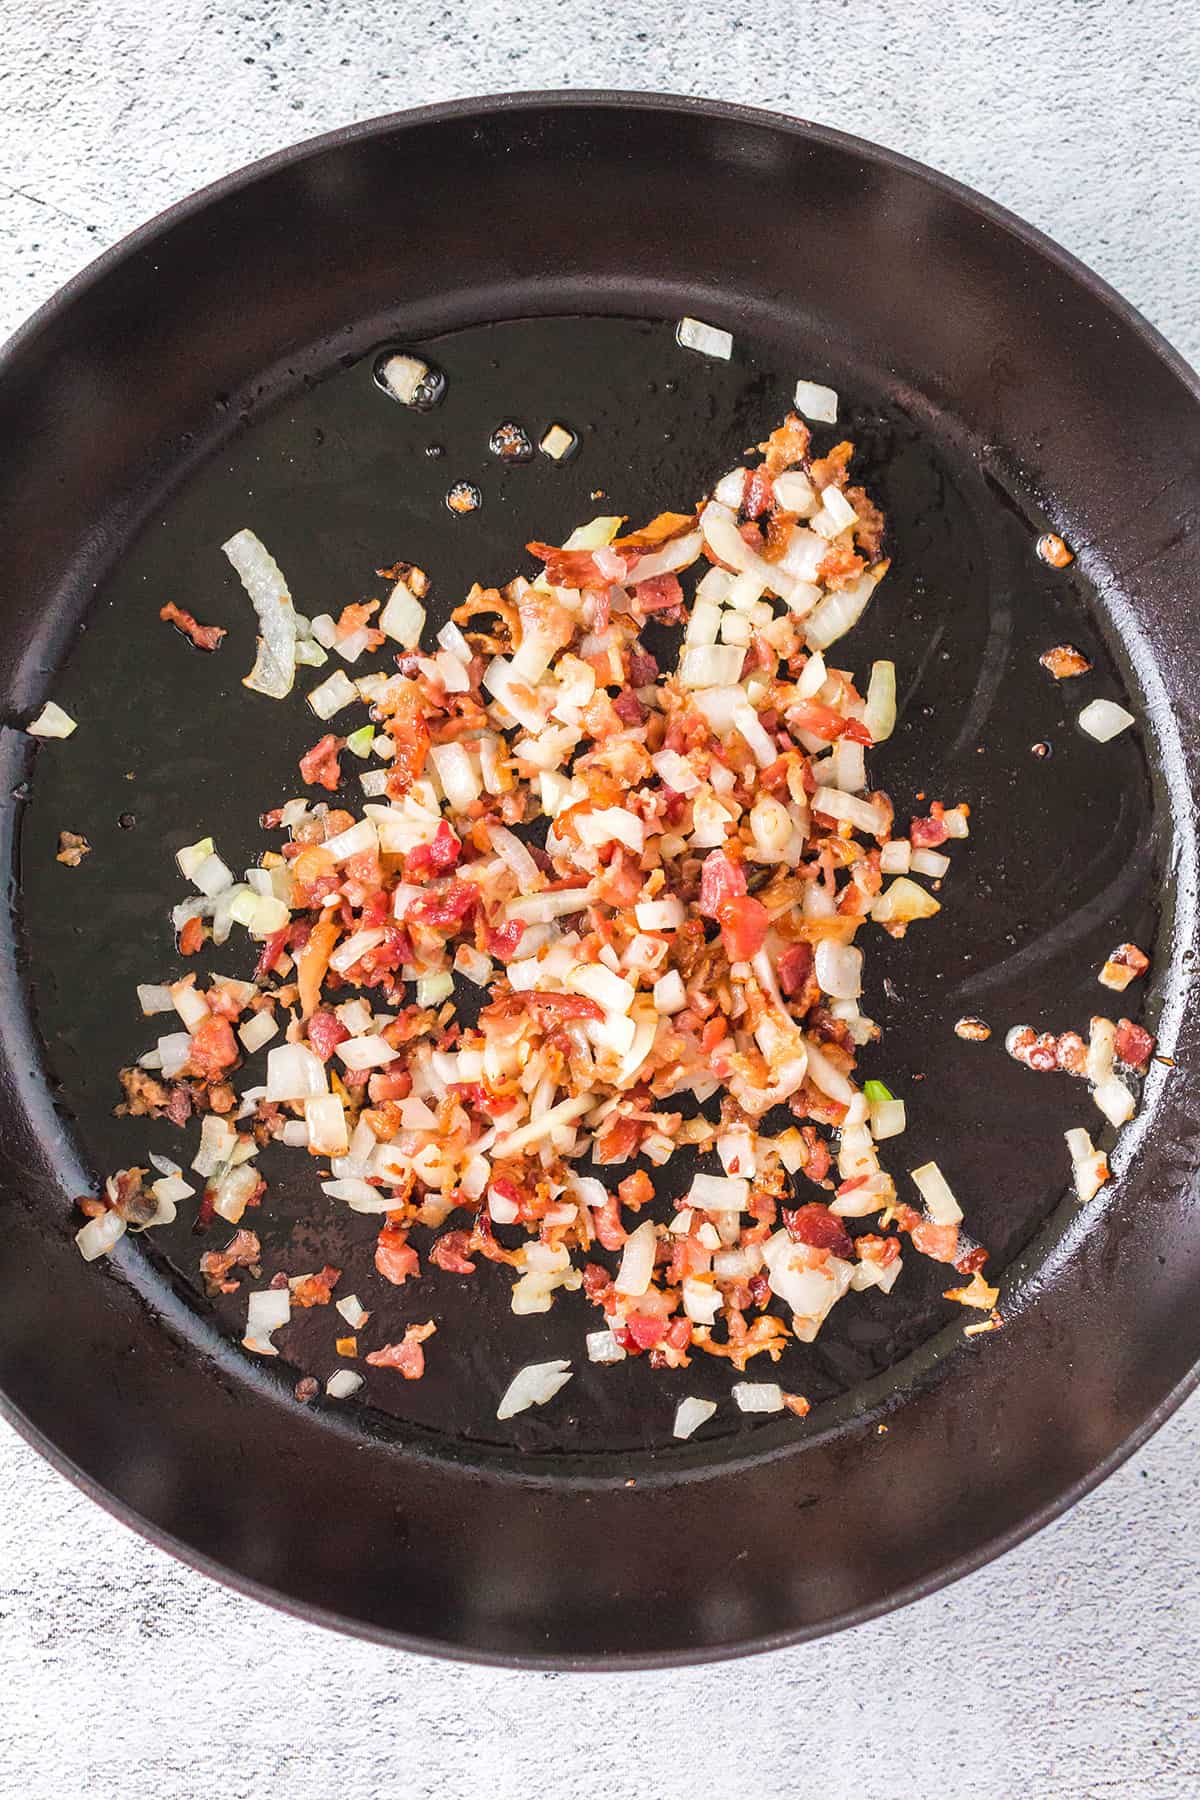 Onions and bacon cooking in a skillet.